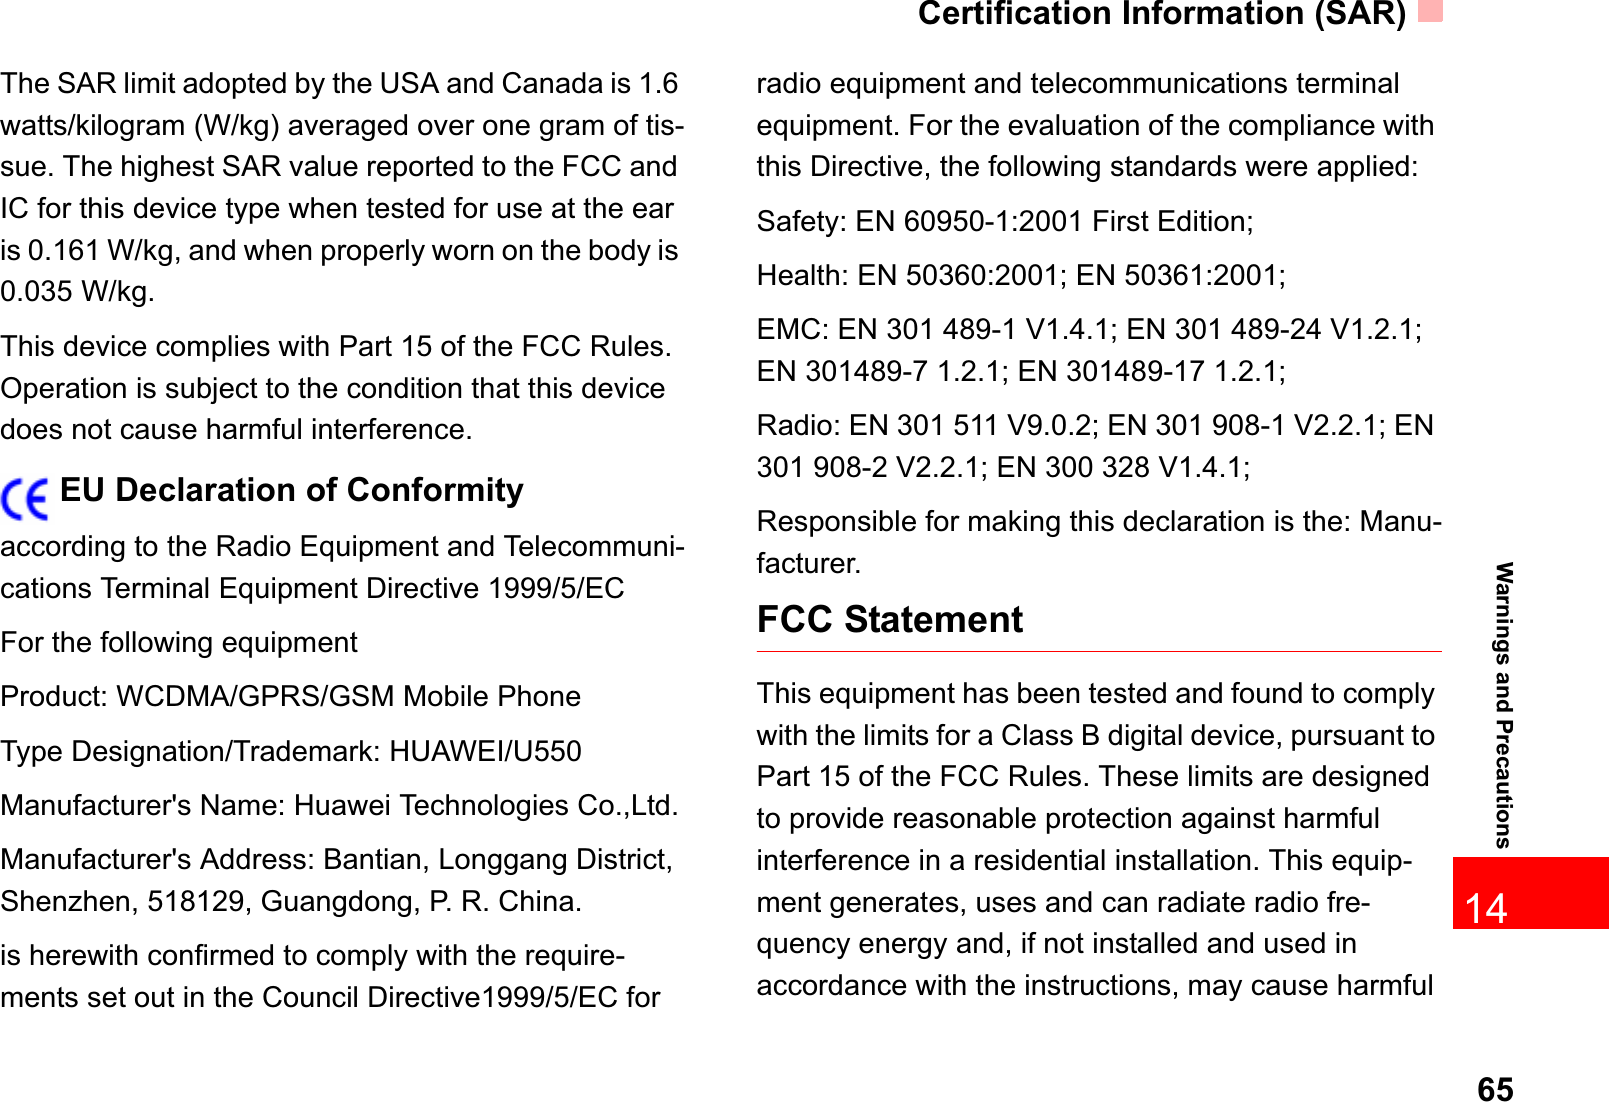 Certification Information (SAR)6514Warnings and PrecautionsThe SAR limit adopted by the USA and Canada is 1.6 watts/kilogram (W/kg) averaged over one gram of tis-sue. The highest SAR value reported to the FCC and IC for this device type when tested for use at the ear is 0.161 W/kg, and when properly worn on the body is 0.035 W/kg.This device complies with Part 15 of the FCC Rules. Operation is subject to the condition that this device does not cause harmful interference.EU Declaration of Conformityaccording to the Radio Equipment and Telecommuni-cations Terminal Equipment Directive 1999/5/ECFor the following equipment Product: WCDMA/GPRS/GSM Mobile PhoneType Designation/Trademark: HUAWEI/U550Manufacturer&apos;s Name: Huawei Technologies Co.,Ltd.Manufacturer&apos;s Address: Bantian, Longgang District, Shenzhen, 518129, Guangdong, P. R. China.is herewith confirmed to comply with the require-ments set out in the Council Directive1999/5/EC for radio equipment and telecommunications terminal equipment. For the evaluation of the compliance with this Directive, the following standards were applied:Safety: EN 60950-1:2001 First Edition;Health: EN 50360:2001; EN 50361:2001;EMC: EN 301 489-1 V1.4.1; EN 301 489-24 V1.2.1; EN 301489-7 1.2.1; EN 301489-17 1.2.1;Radio: EN 301 511 V9.0.2; EN 301 908-1 V2.2.1; EN 301 908-2 V2.2.1; EN 300 328 V1.4.1;Responsible for making this declaration is the: Manu-facturer.FCC StatementThis equipment has been tested and found to comply with the limits for a Class B digital device, pursuant to Part 15 of the FCC Rules. These limits are designed to provide reasonable protection against harmful interference in a residential installation. This equip-ment generates, uses and can radiate radio fre-quency energy and, if not installed and used in accordance with the instructions, may cause harmful 